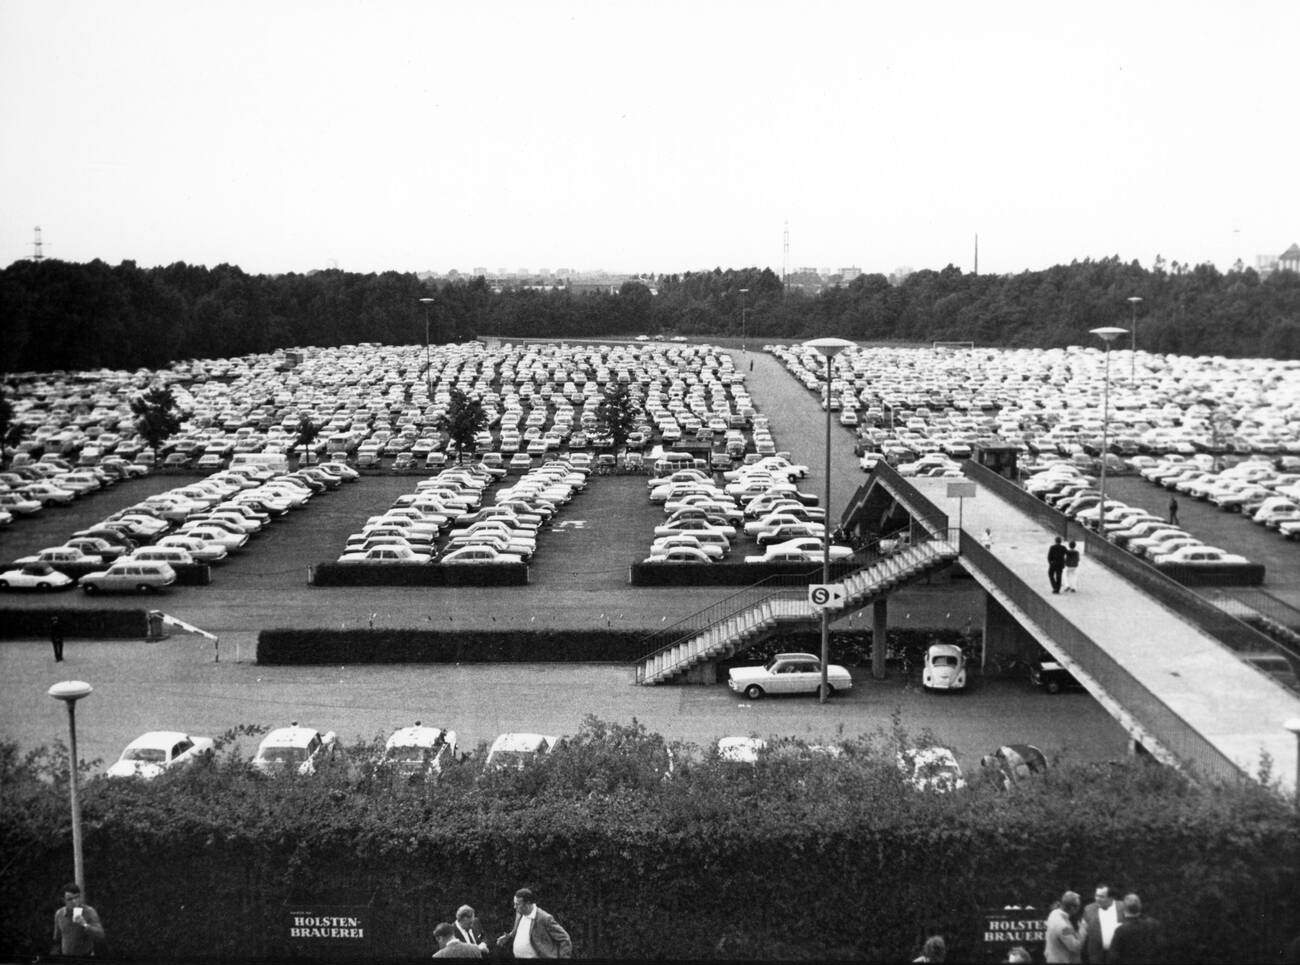 A view of the parking lot of Volksparkstadion in Hamburg, Germany in 1970.